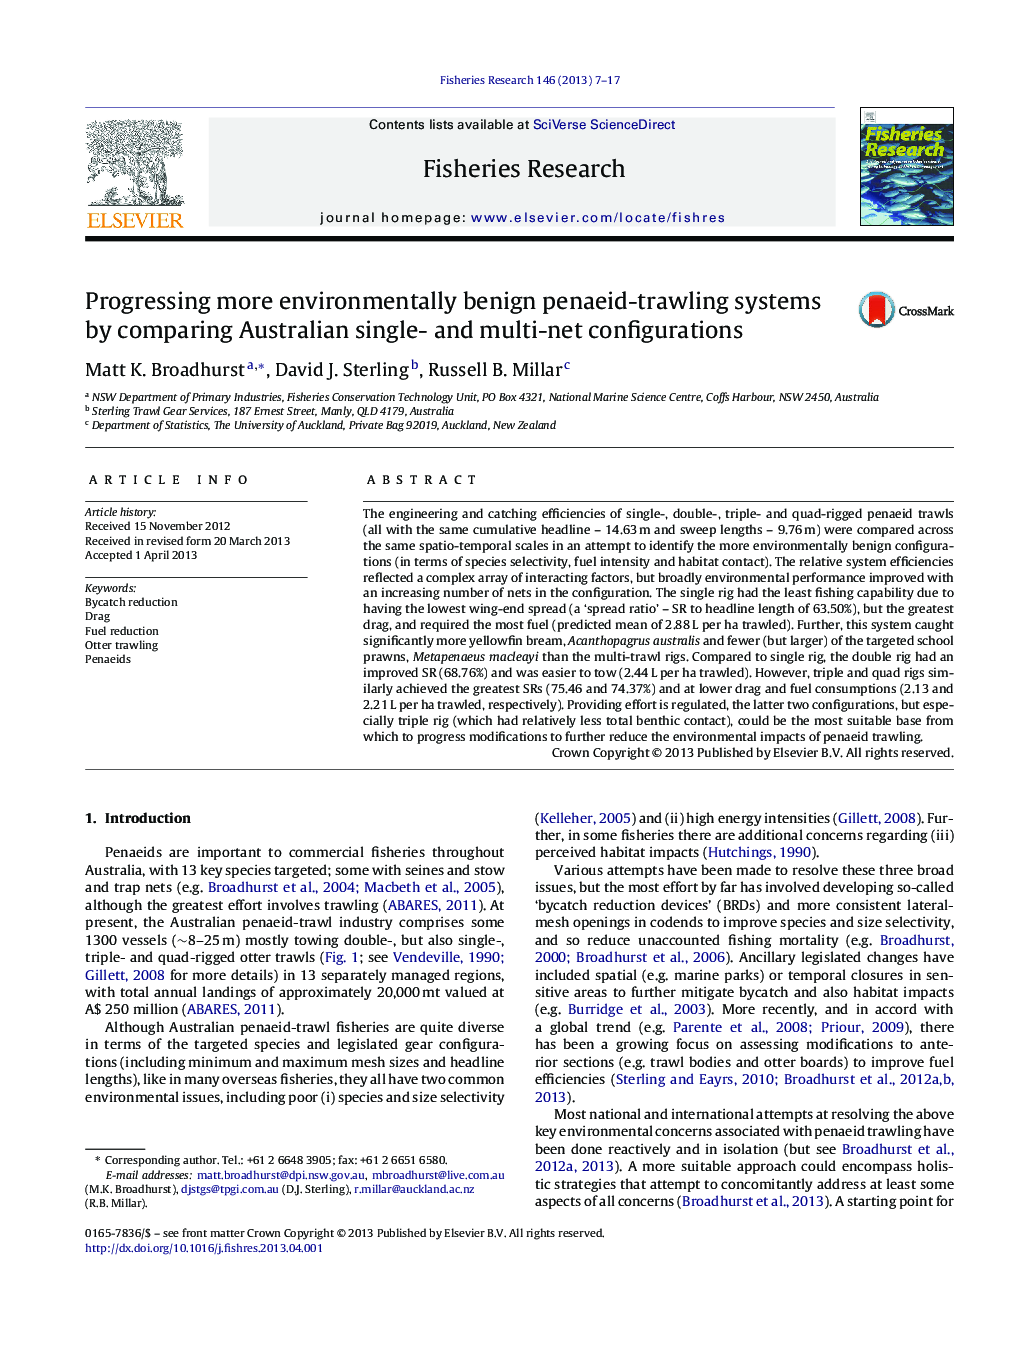 Progressing more environmentally benign penaeid-trawling systems by comparing Australian single- and multi-net configurations